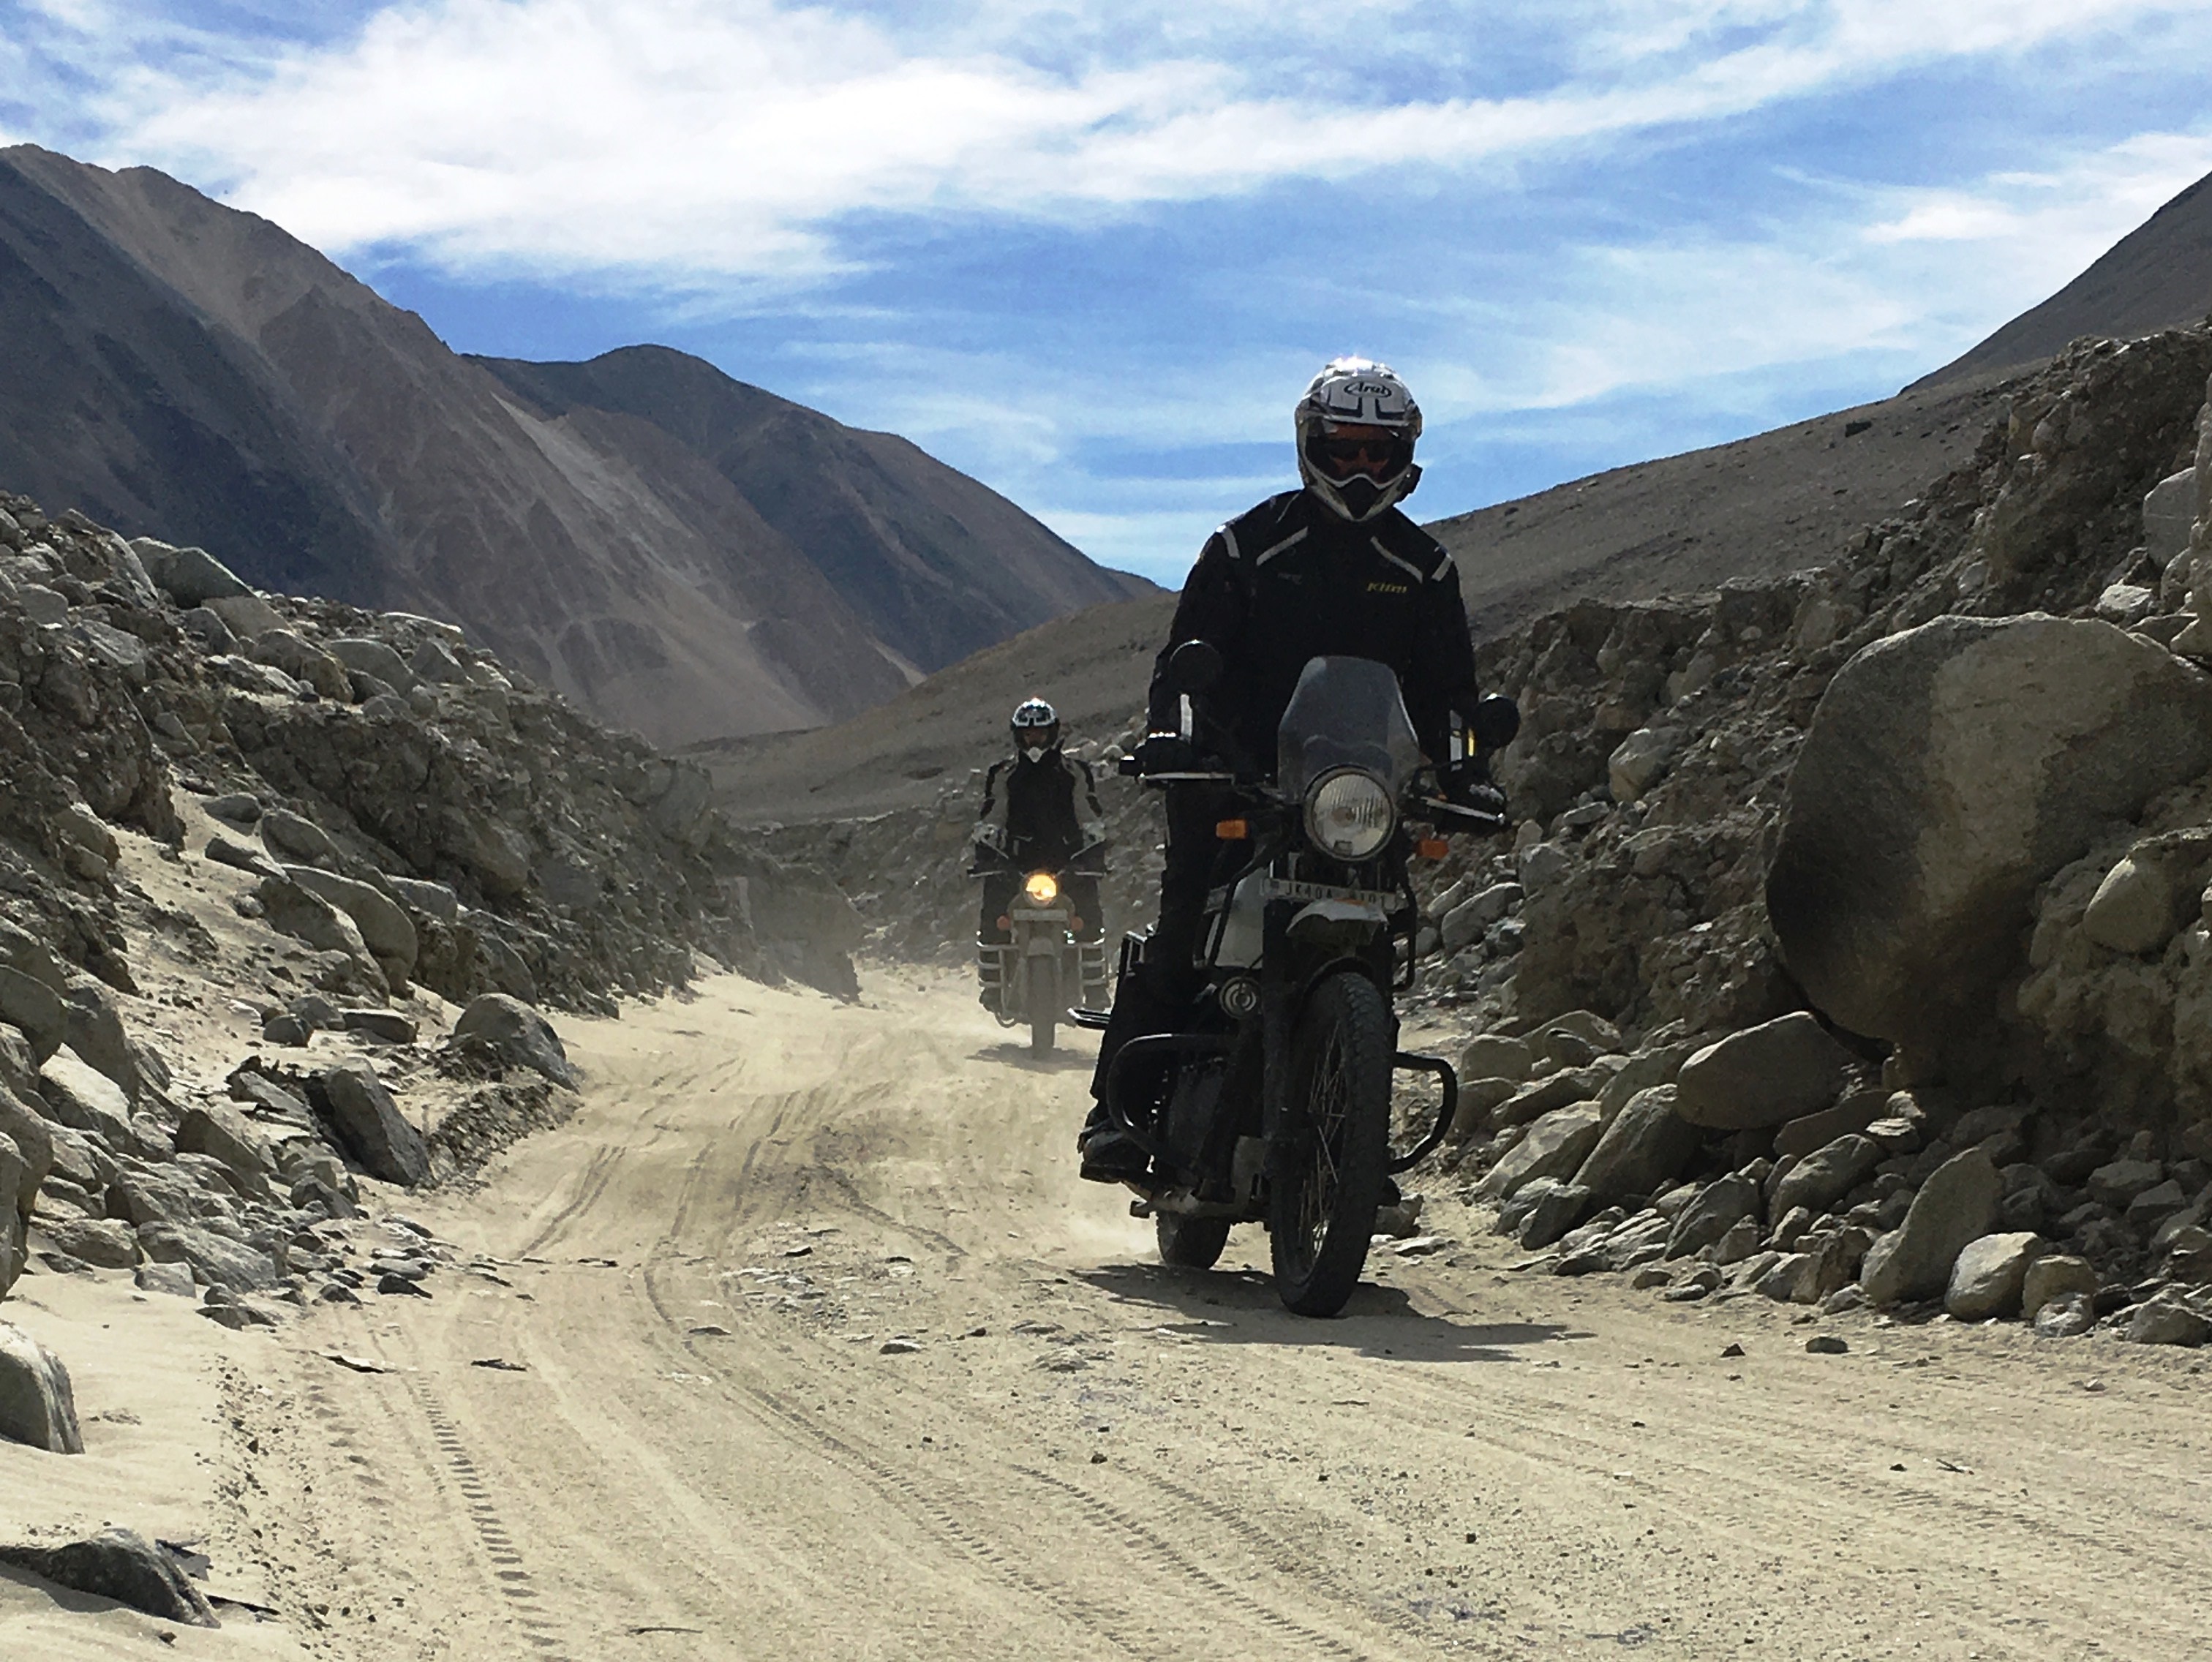 5 best motorcycle touring destinations in Asia that will leave riders astounded